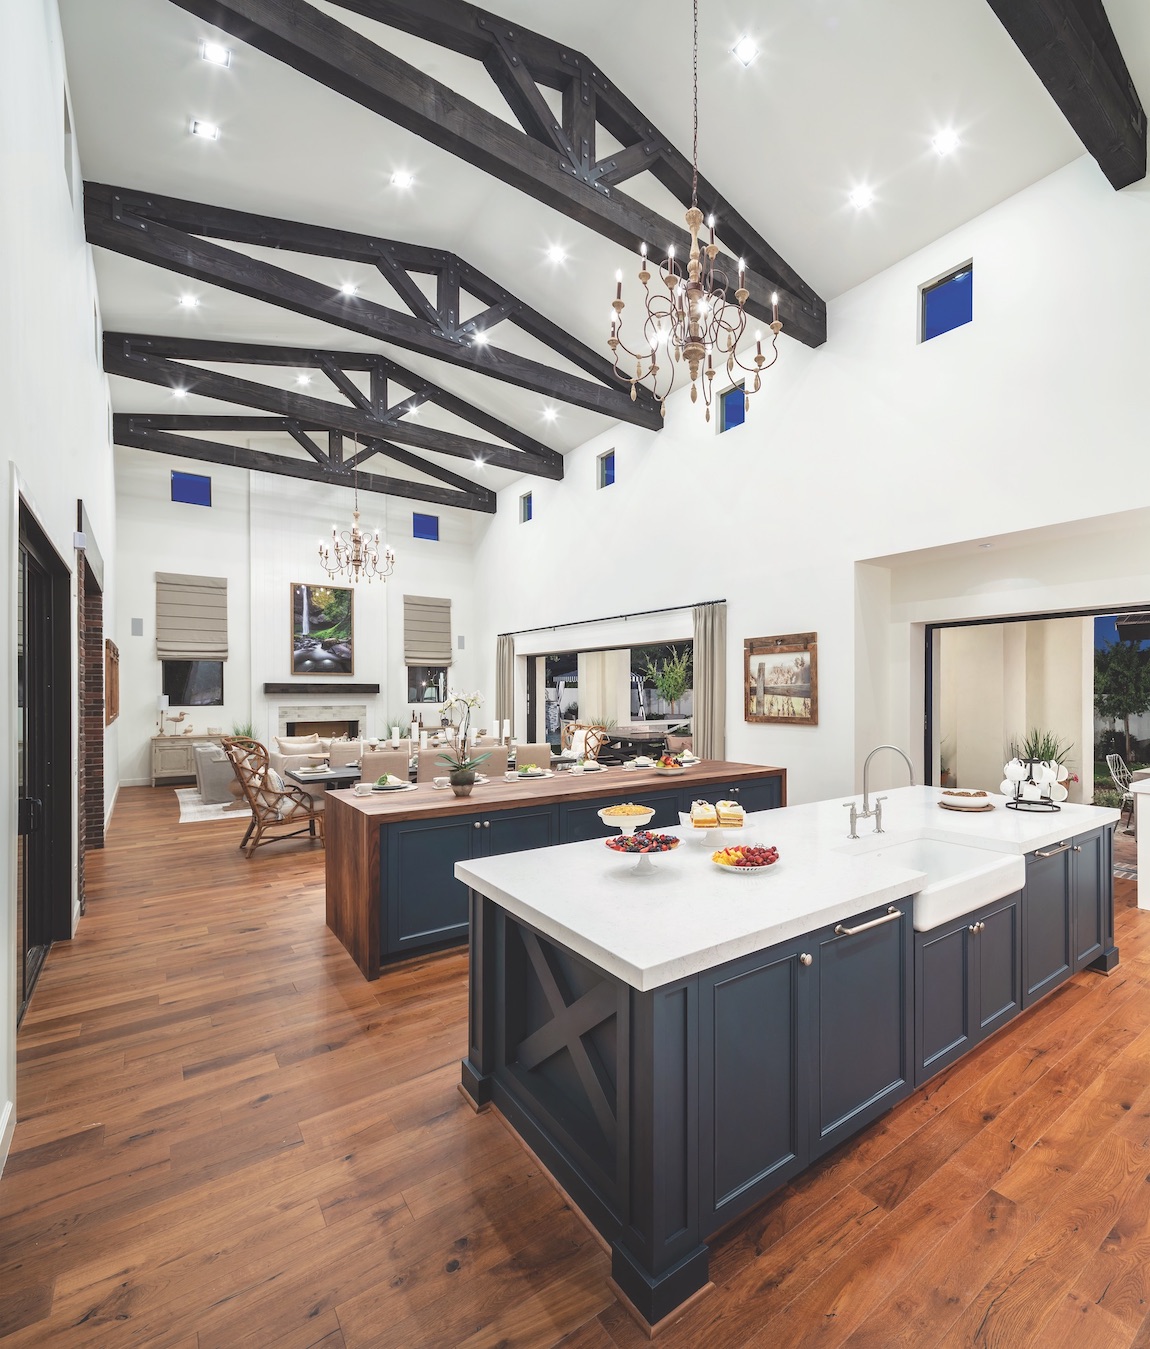 Expansive open floor layout featuring barn ceiling design